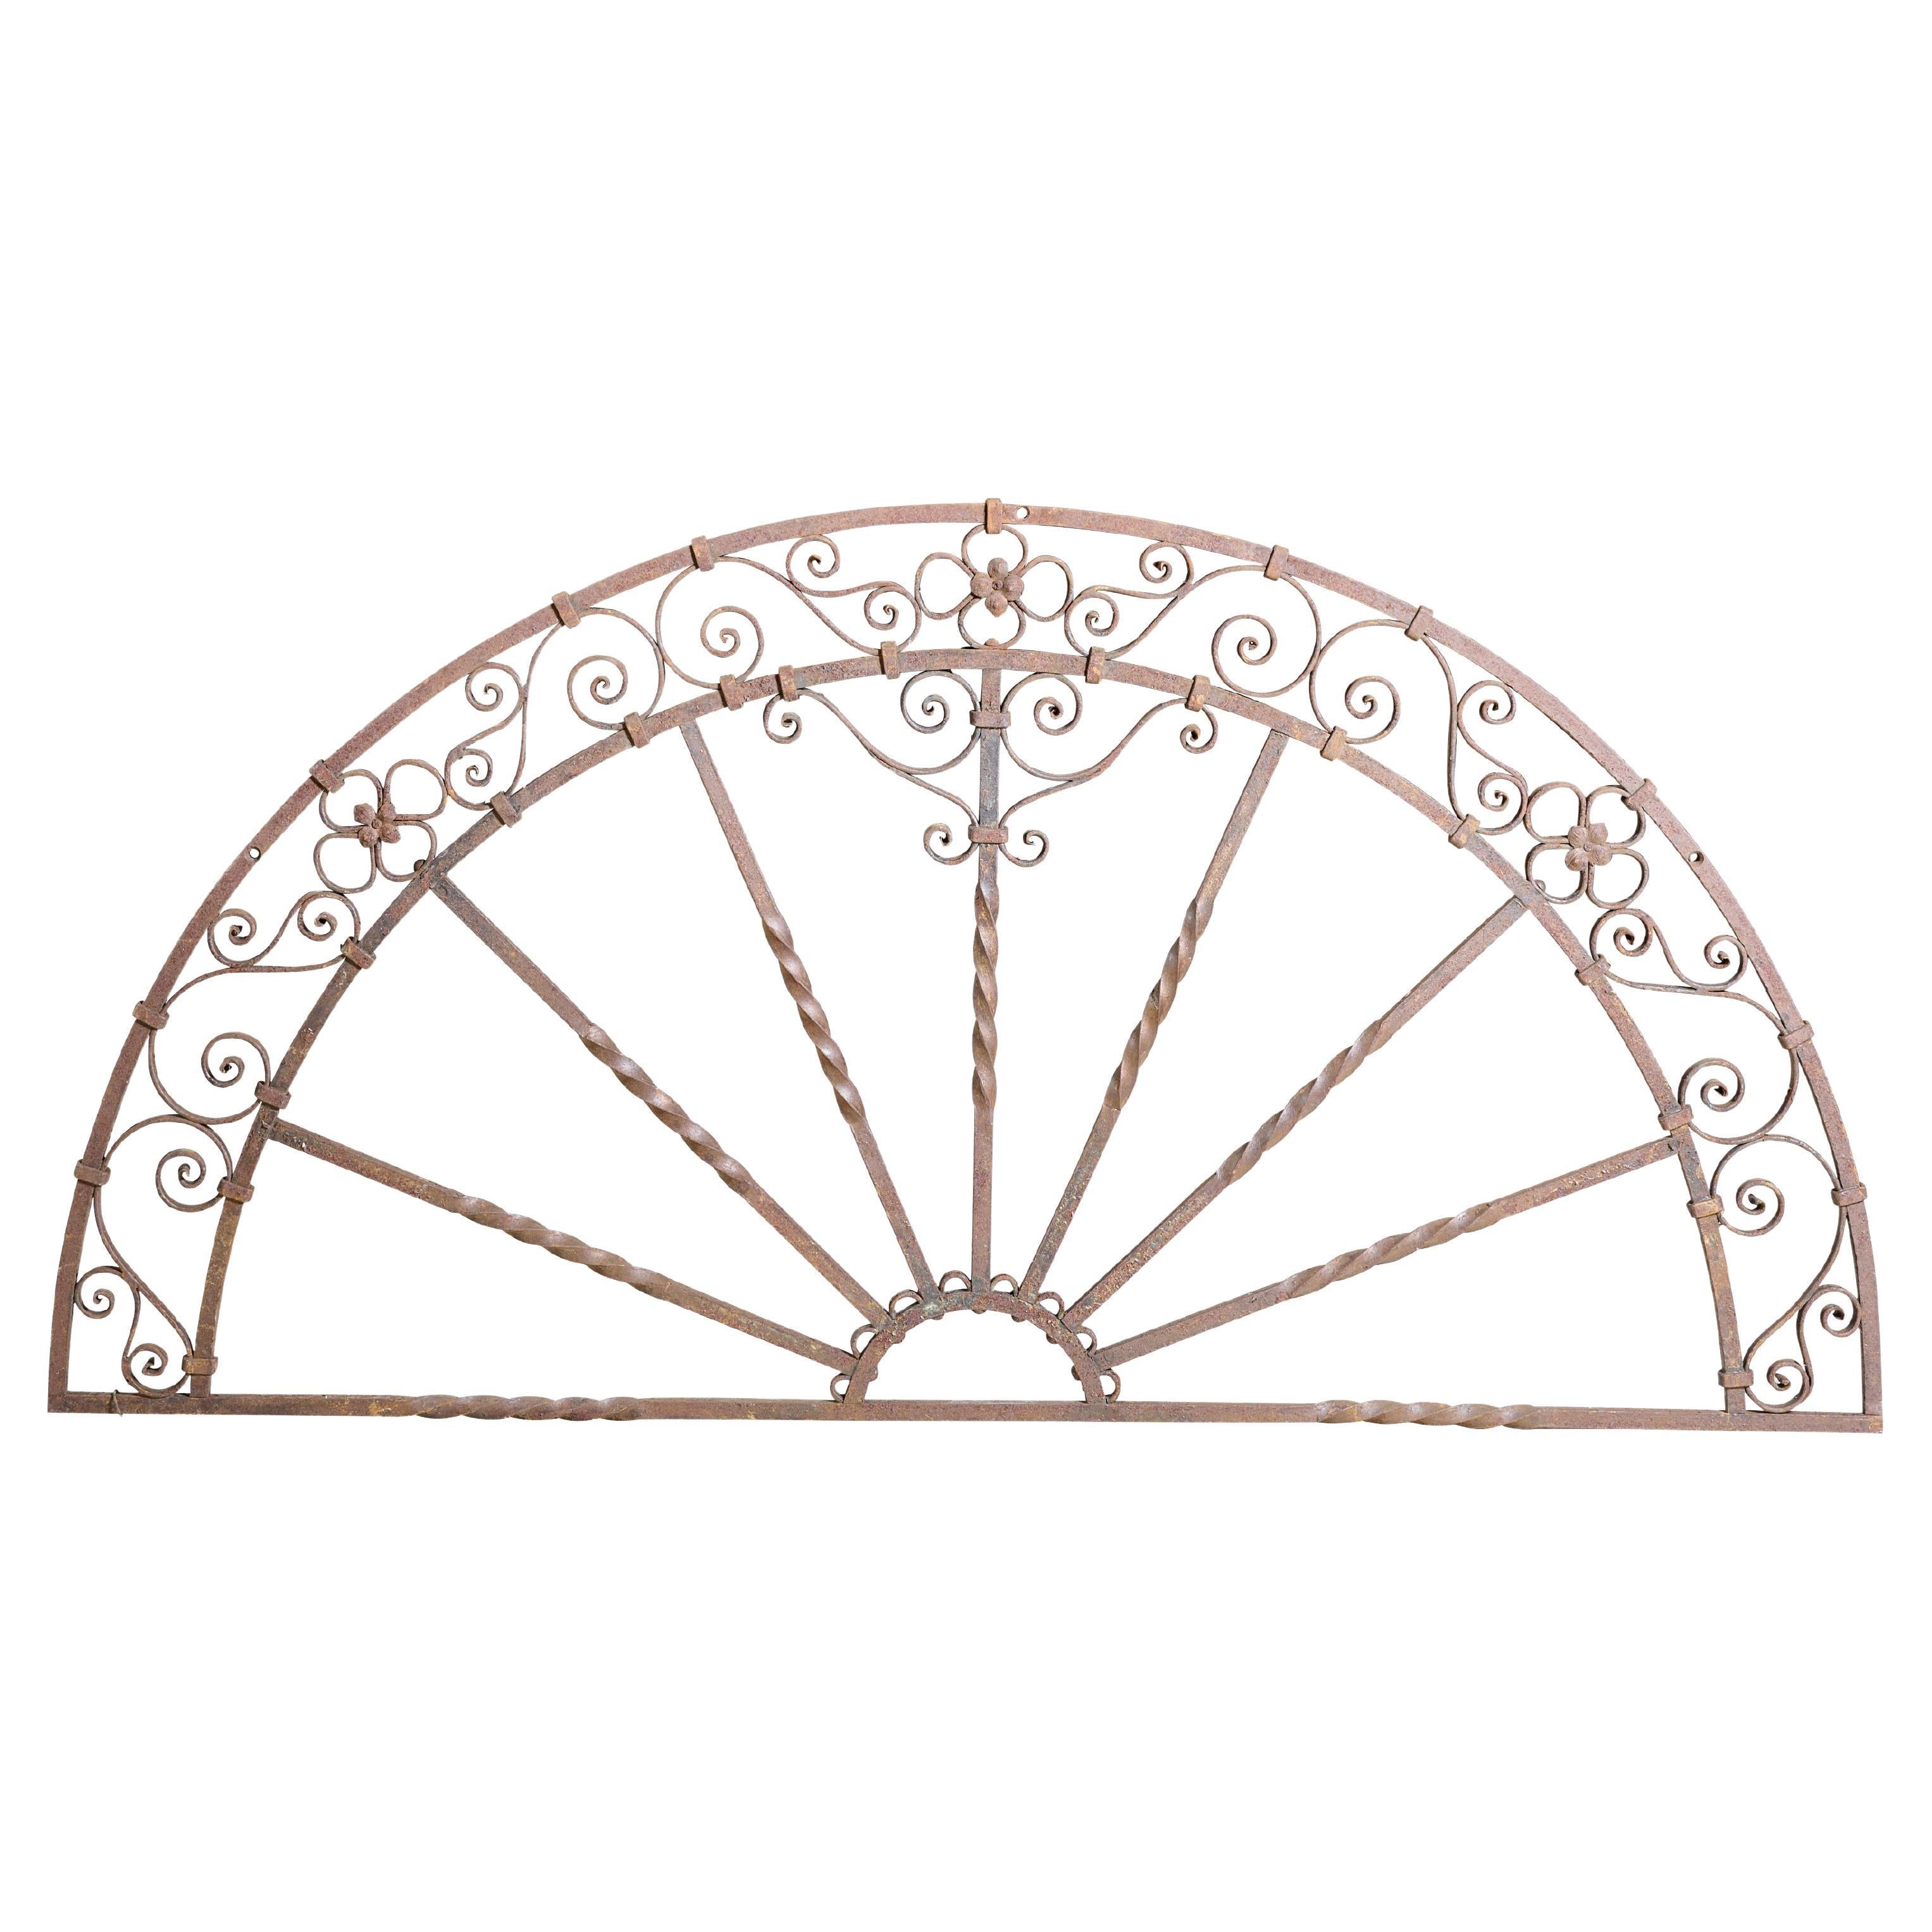 Decorative Wrought Iron Grill For Sale